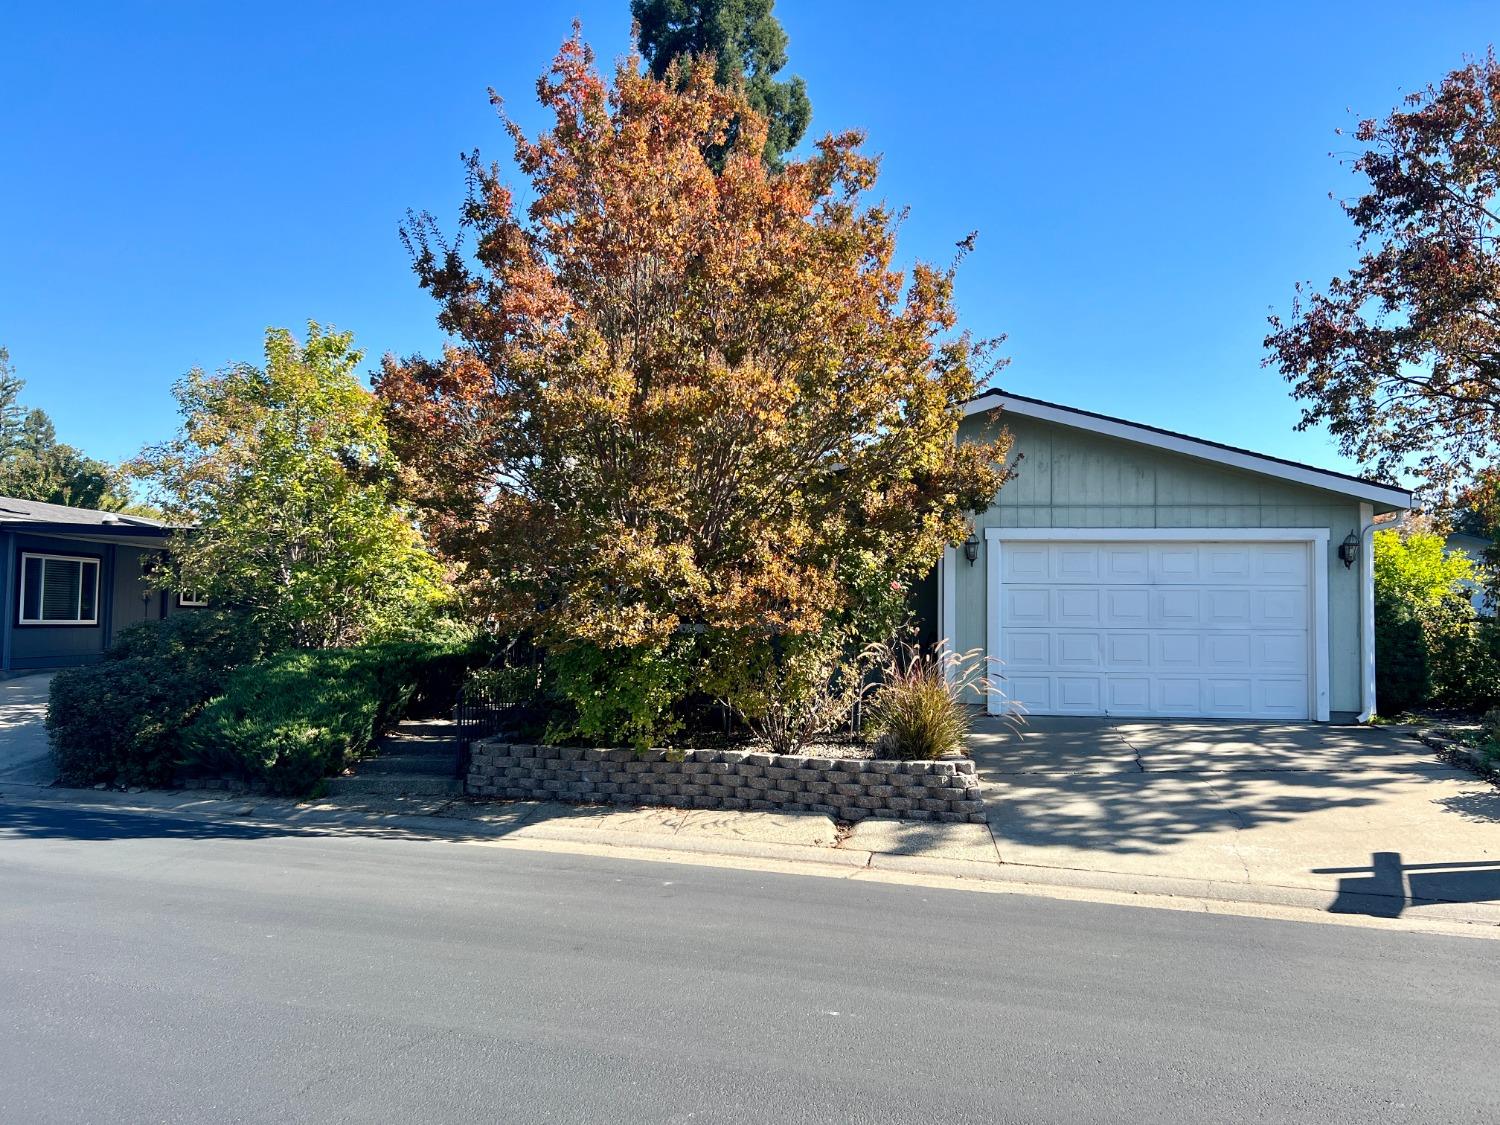 Photo of 6904 Gold Oak Ln in Citrus Heights, CA